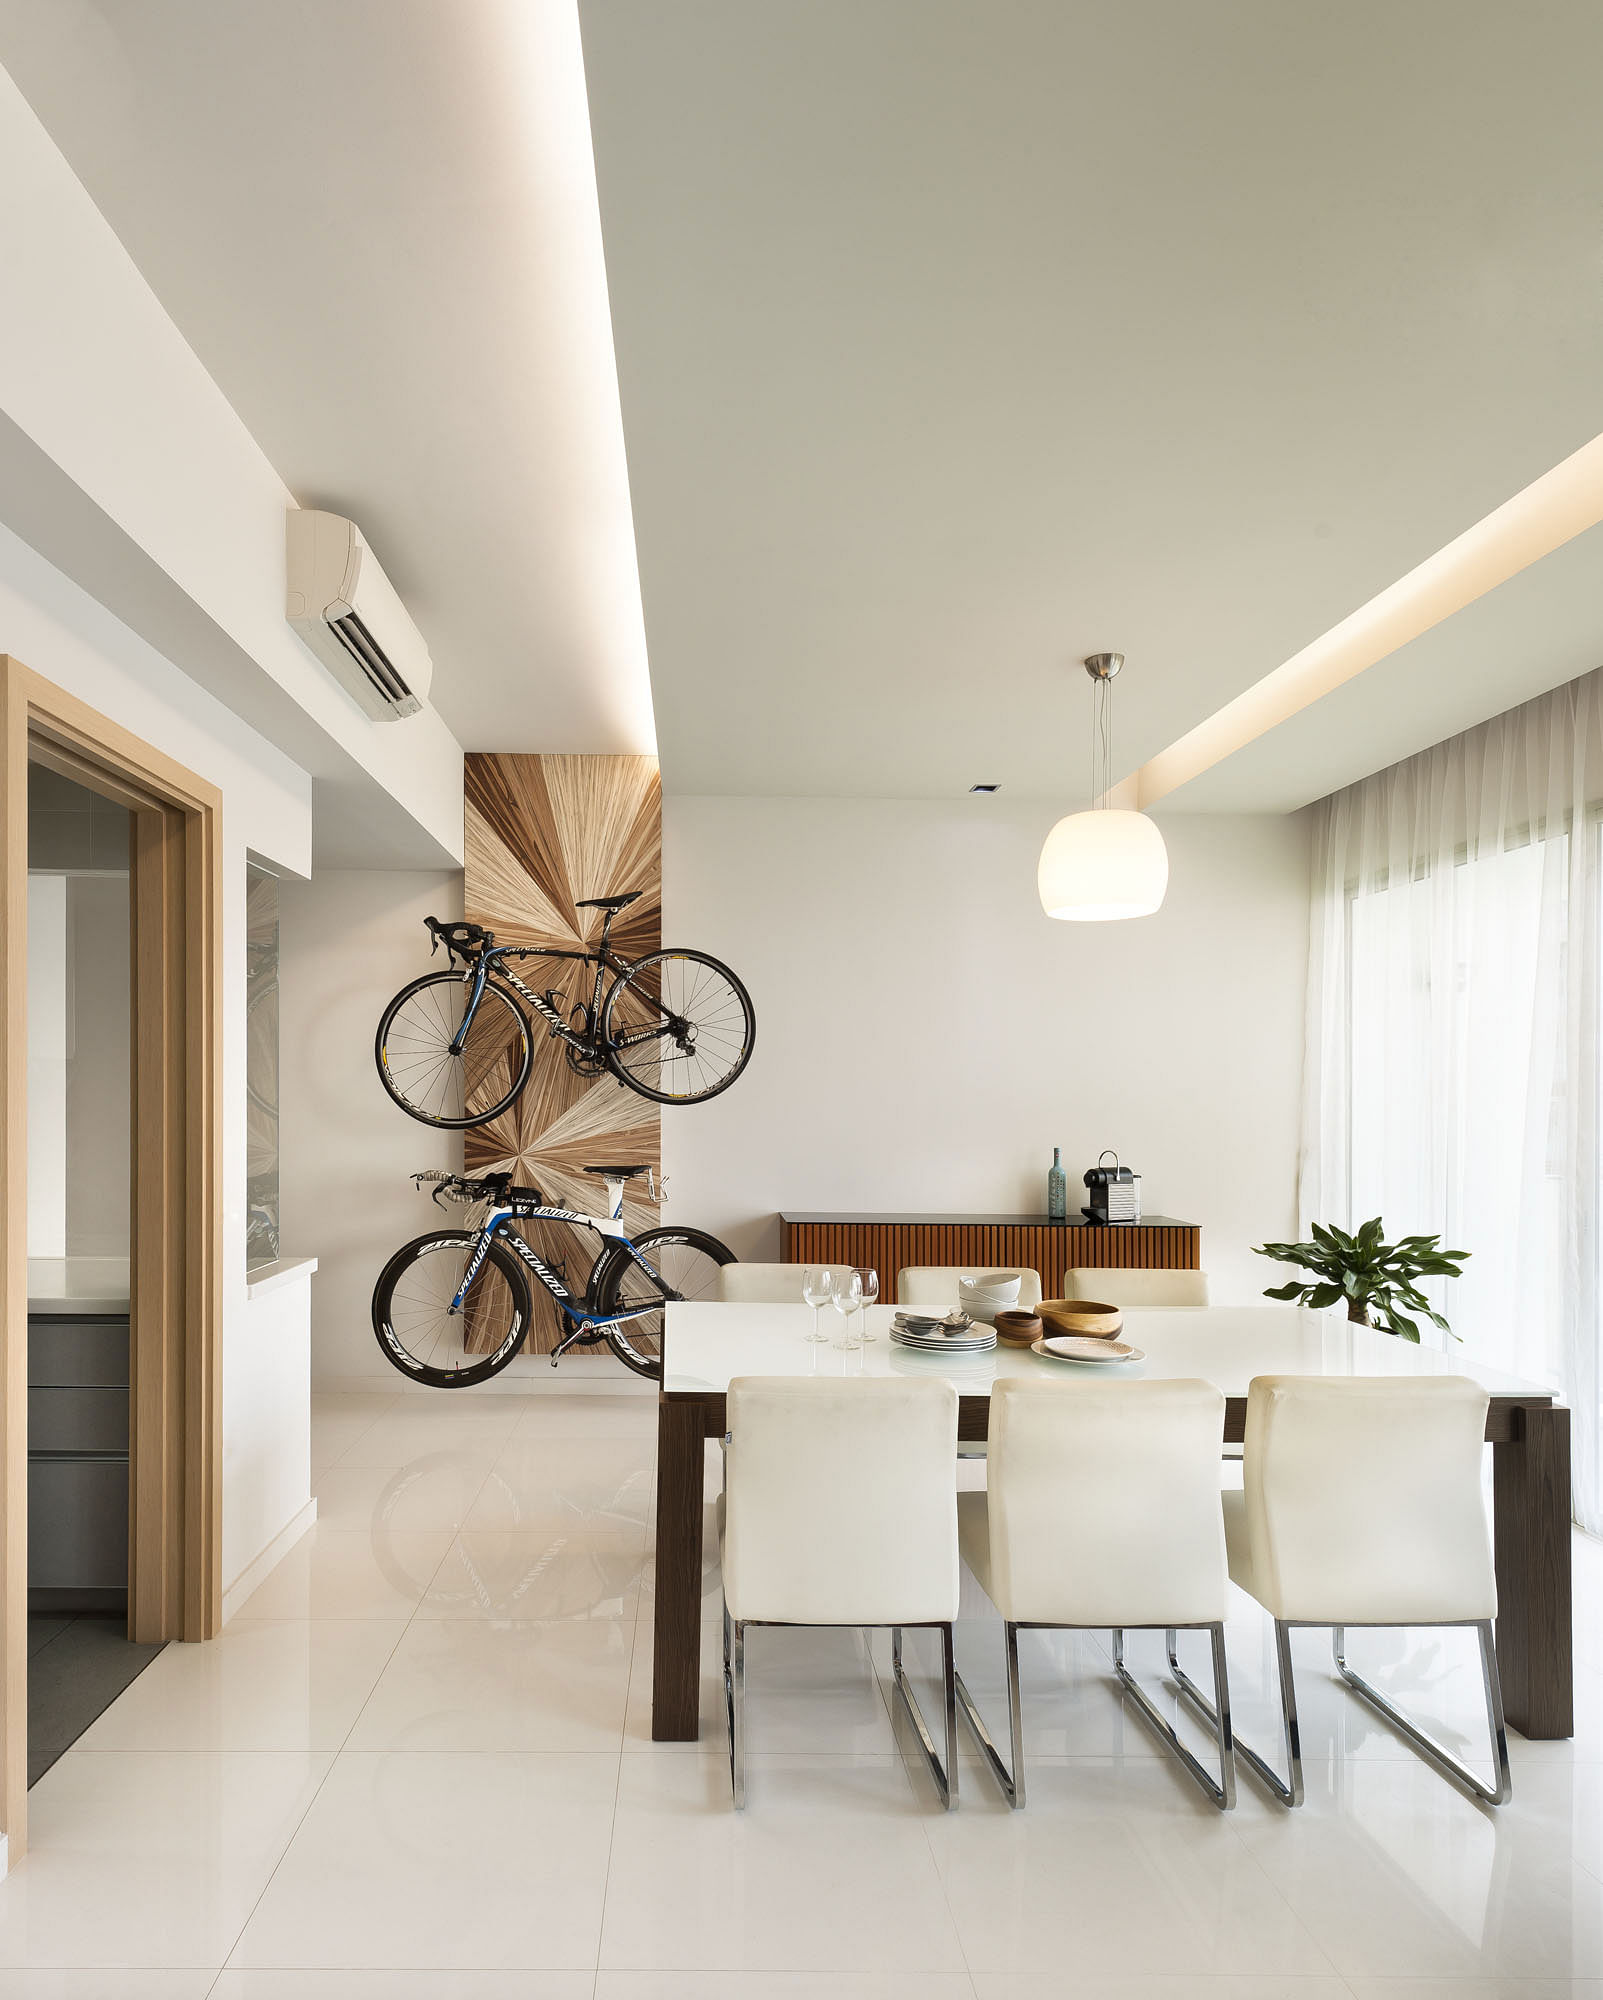 Hung neatly, the two sporty bicycles don't mar the elegant decor in this dining room of a condominium in the Livia Condo, Pasir Ris Grove.